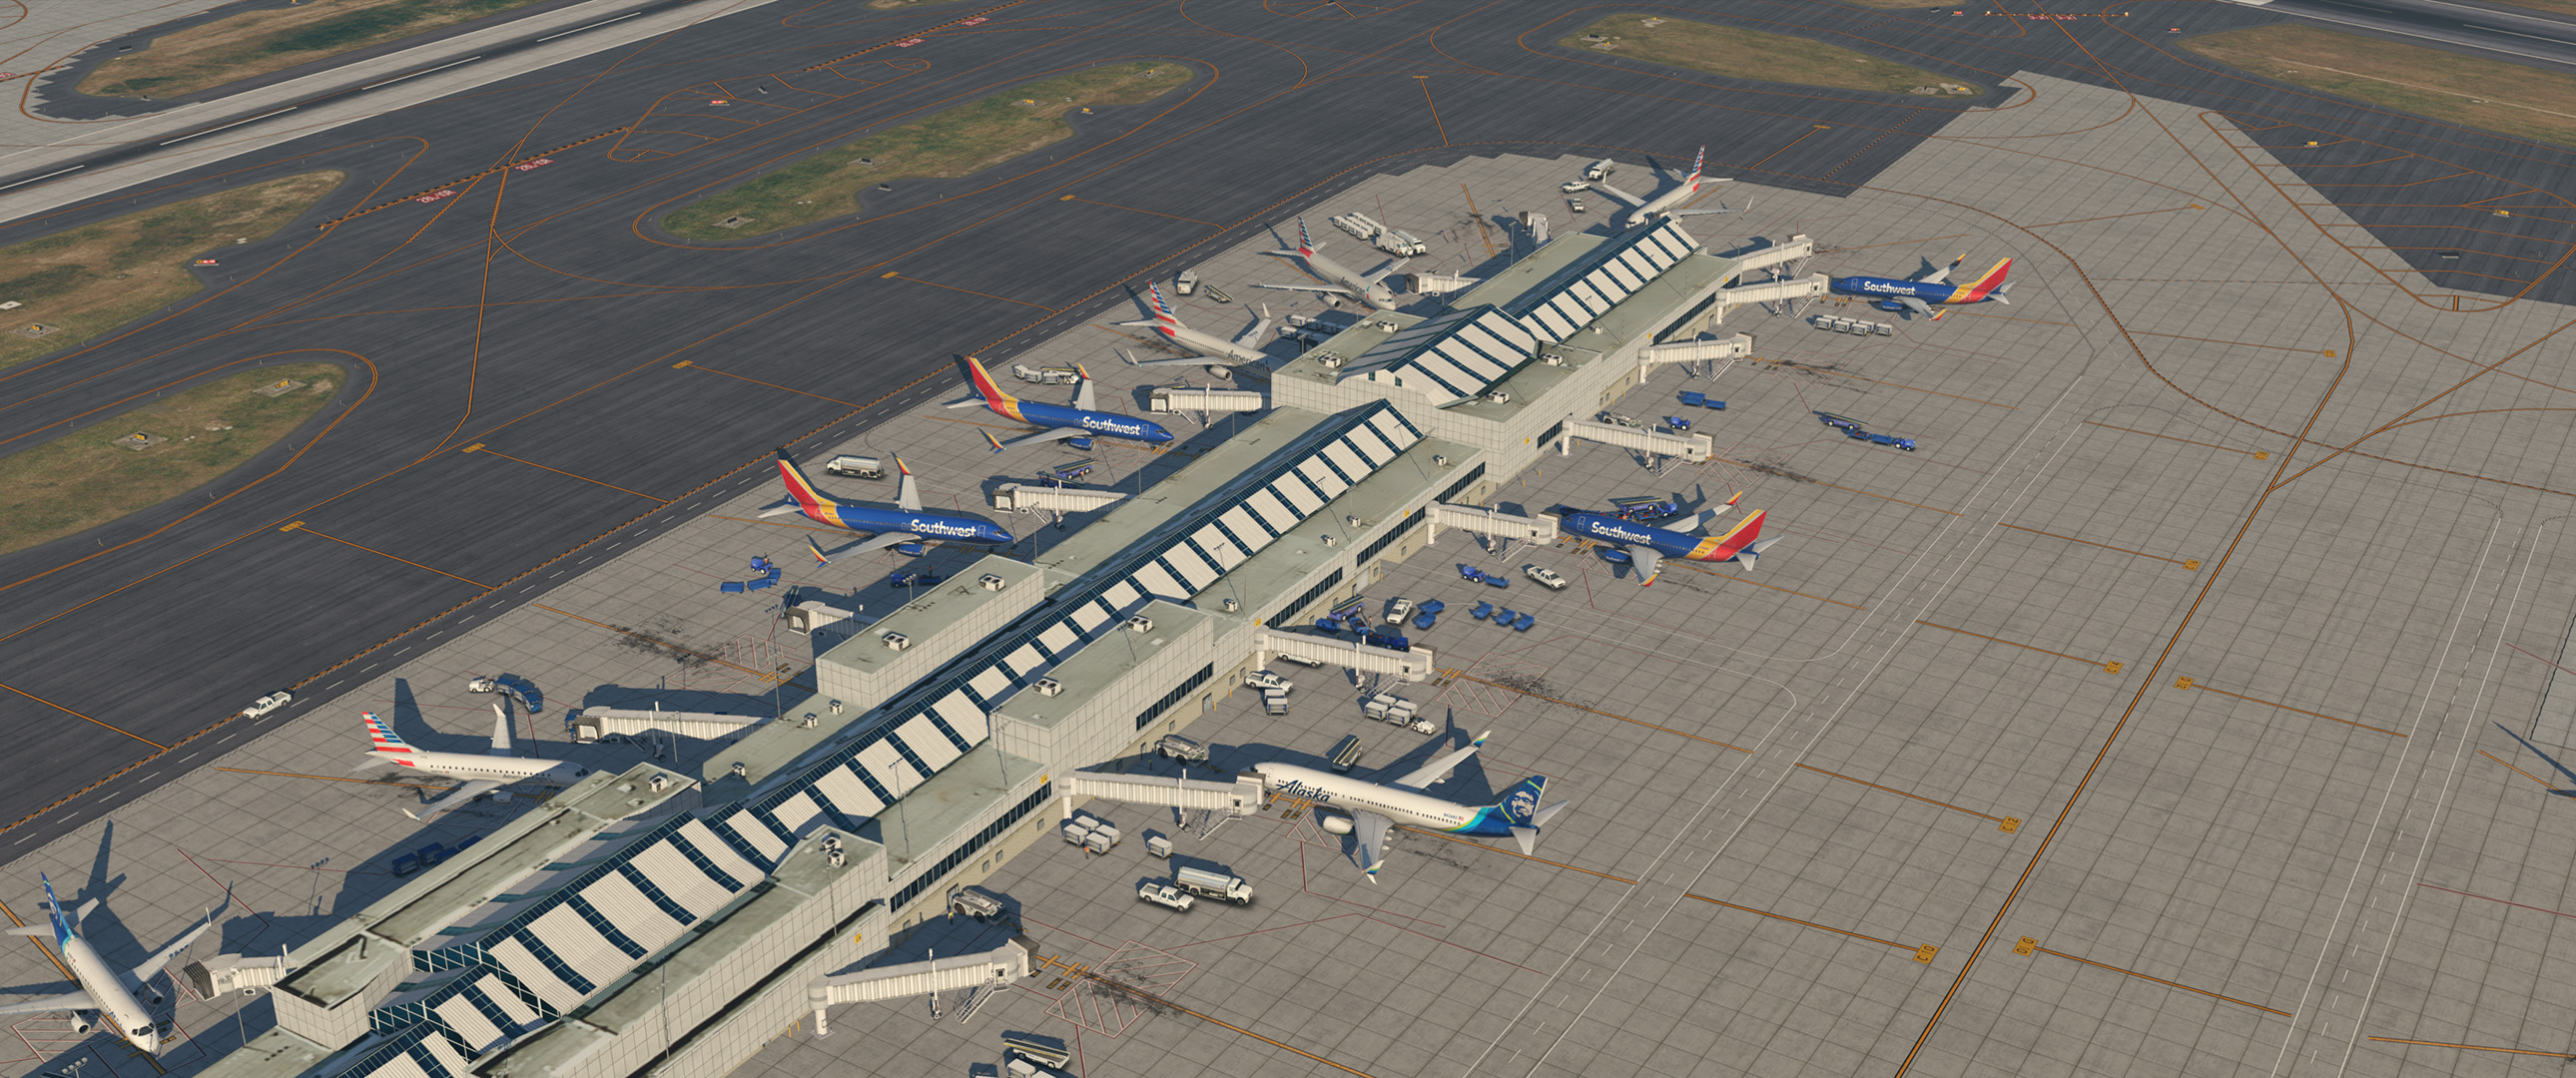 Best Freeware Sceneries for X-Plane 11 image 96